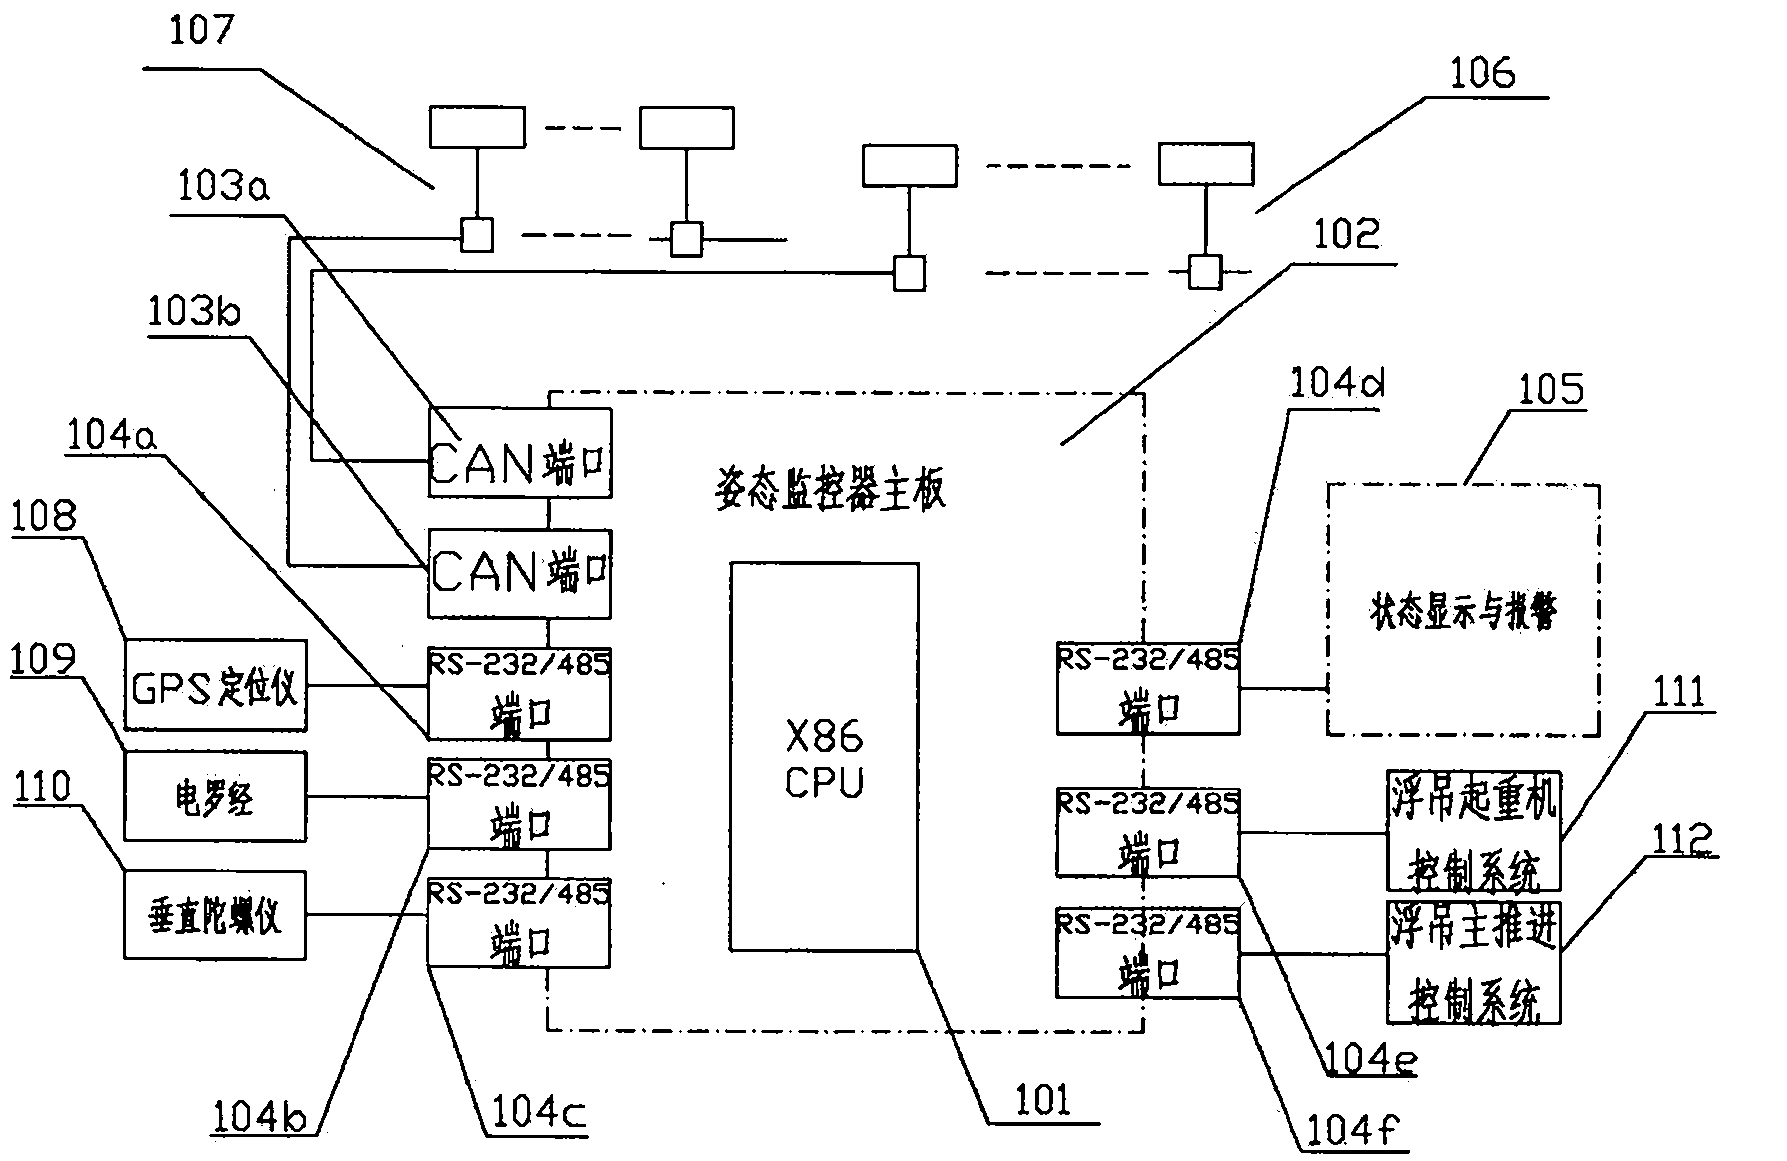 Method for monitoring work attitude and safety of hoisting operation of floating crane